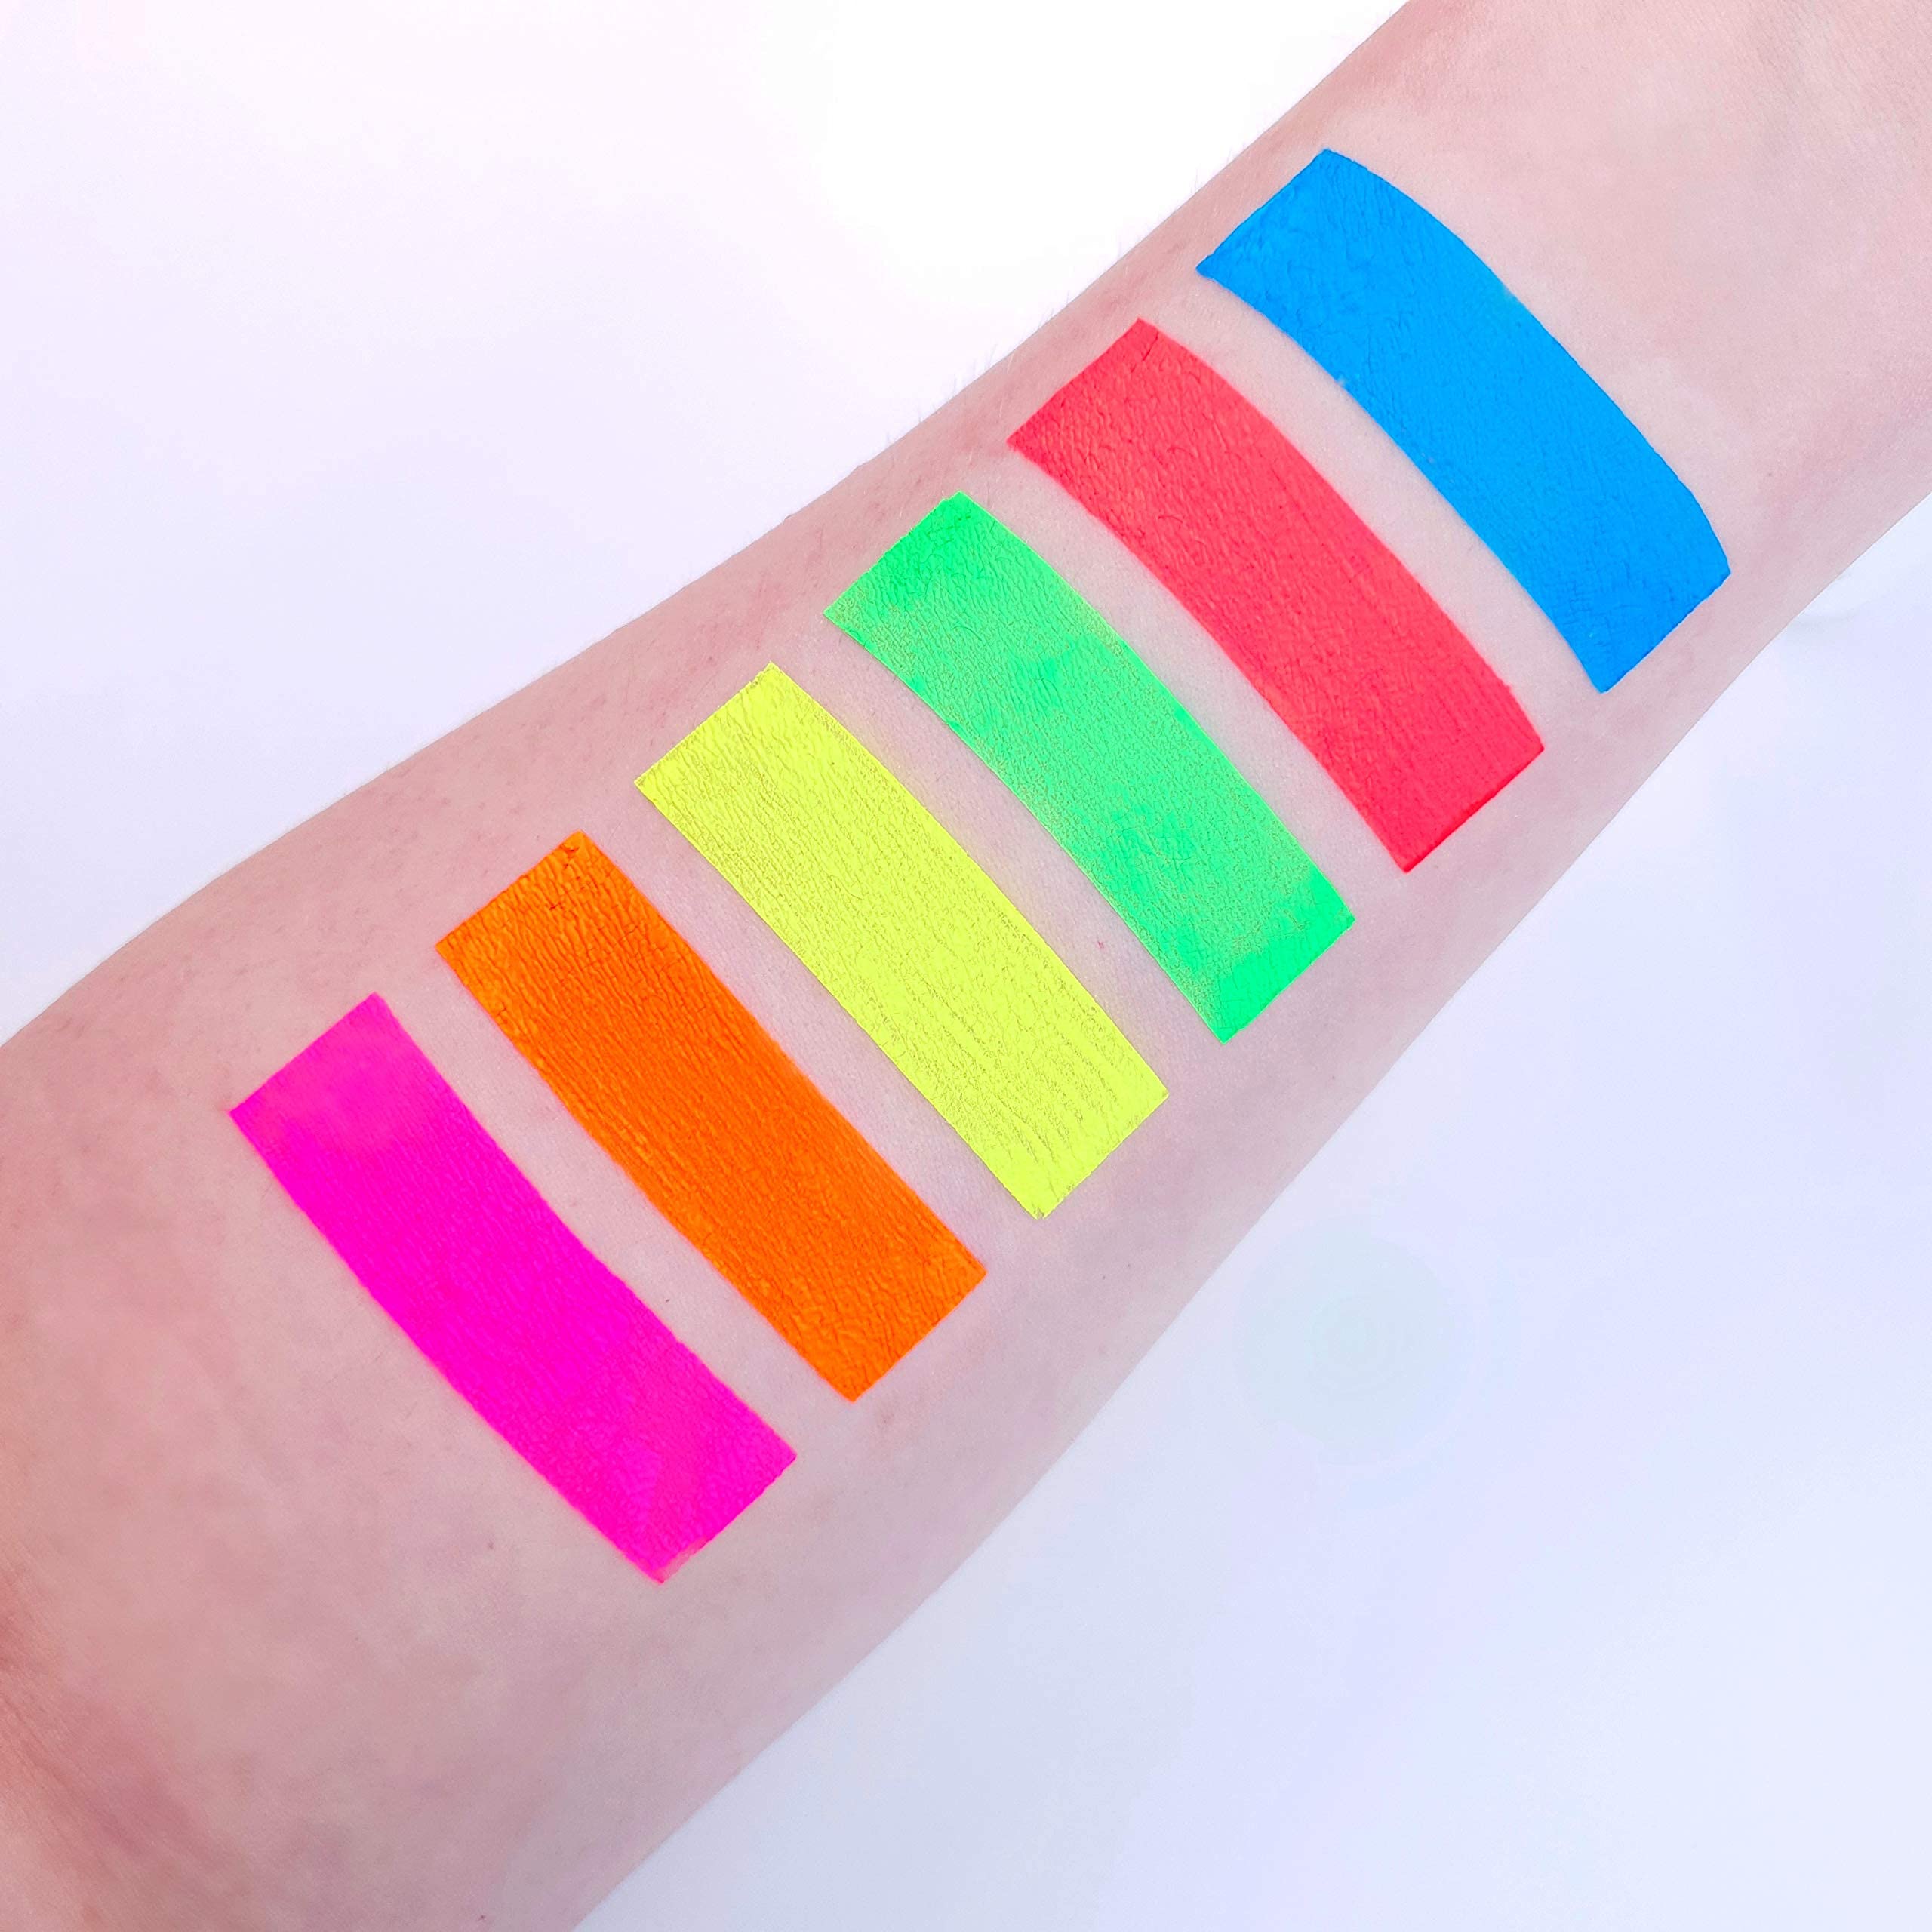 UV Glow Blacklight Face and Body Paint - Neon Fluorescent (0.34oz (Pack of 6))